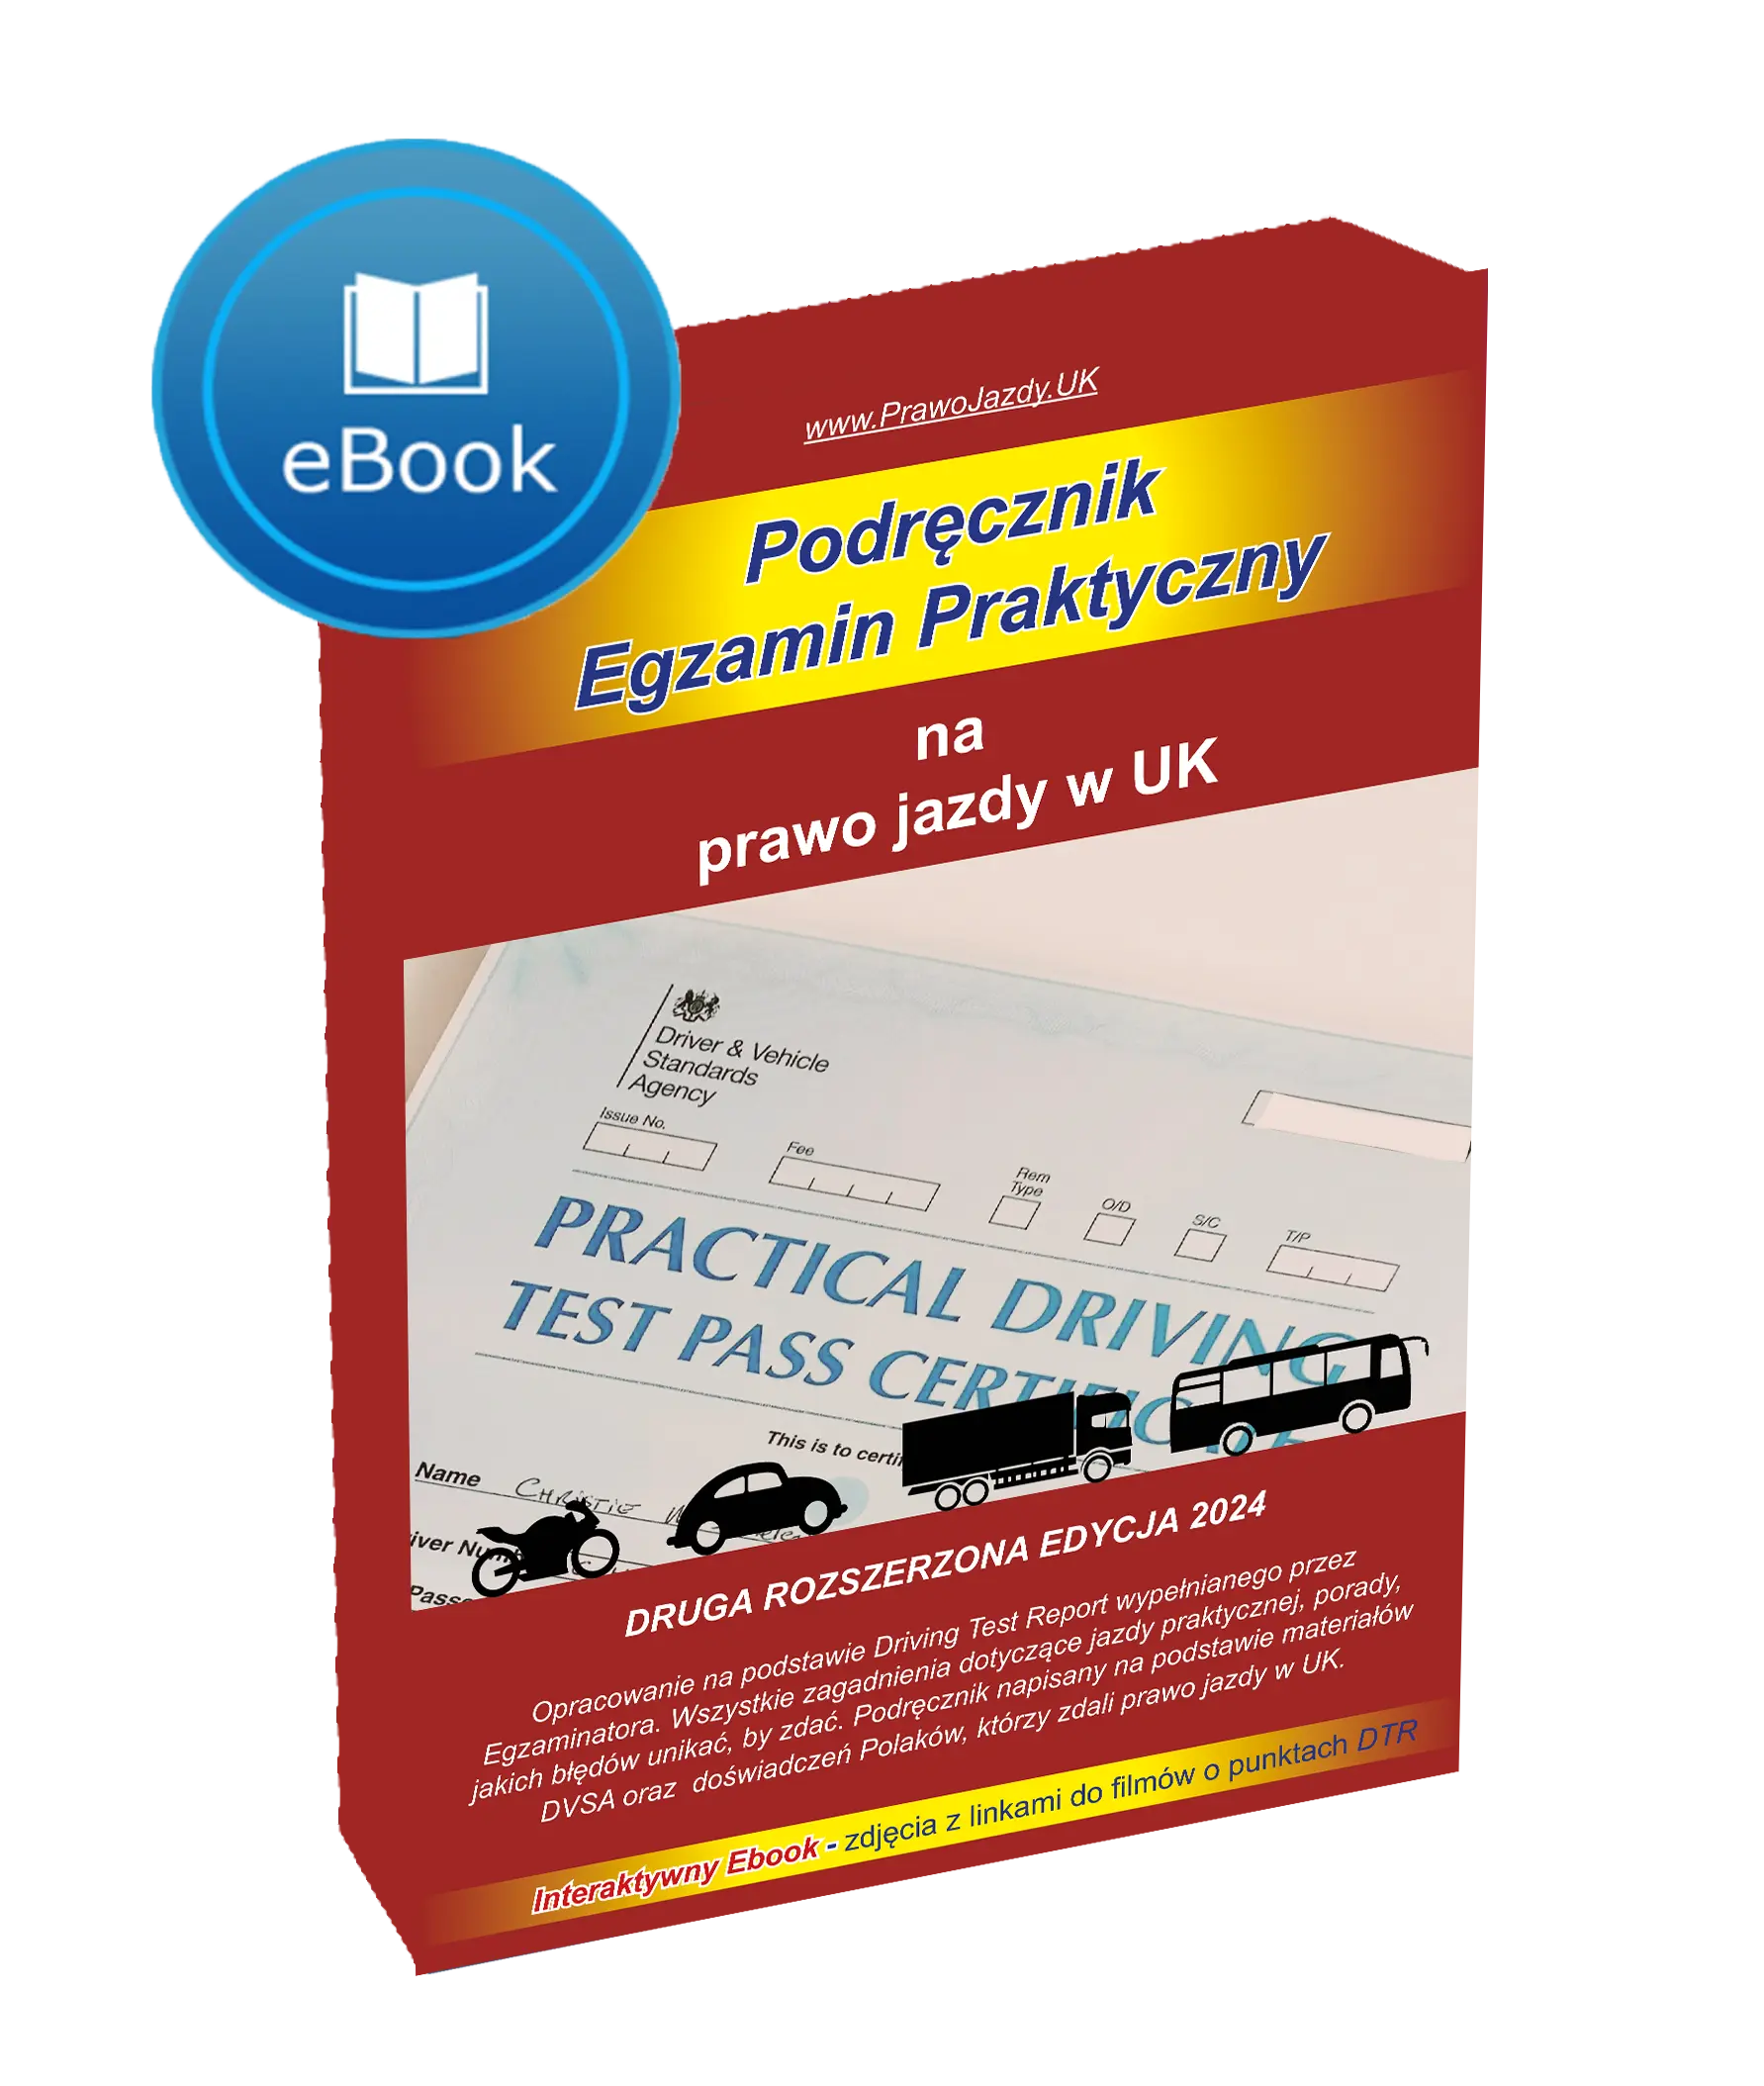 Practical driving exam test in Polish in the UK